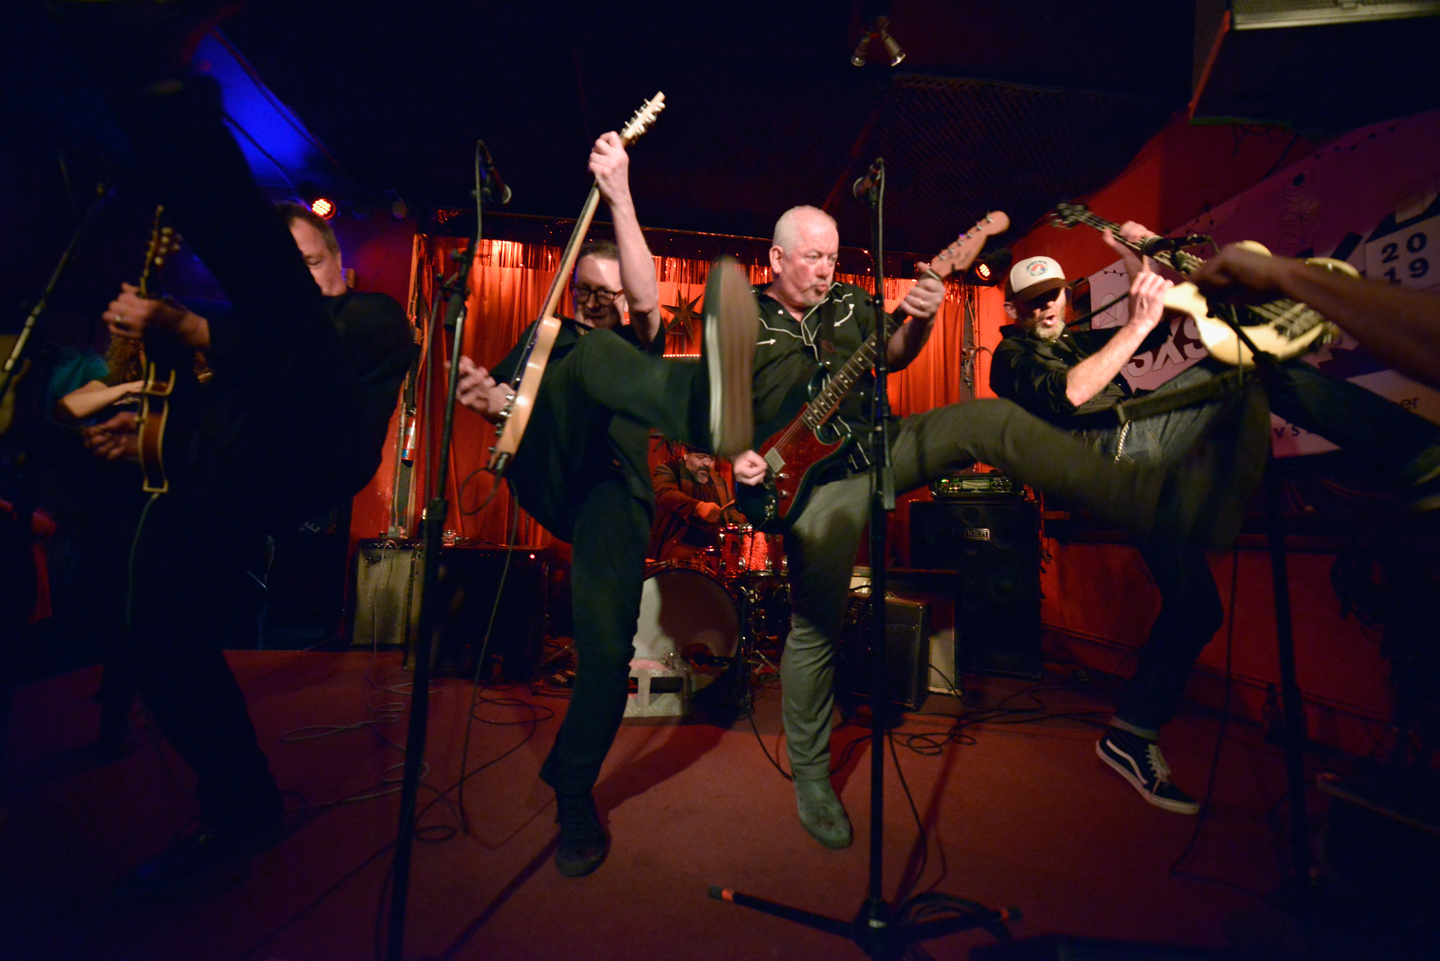 The Waco Brothers at the Bloodshot Records event at the Continental Club.